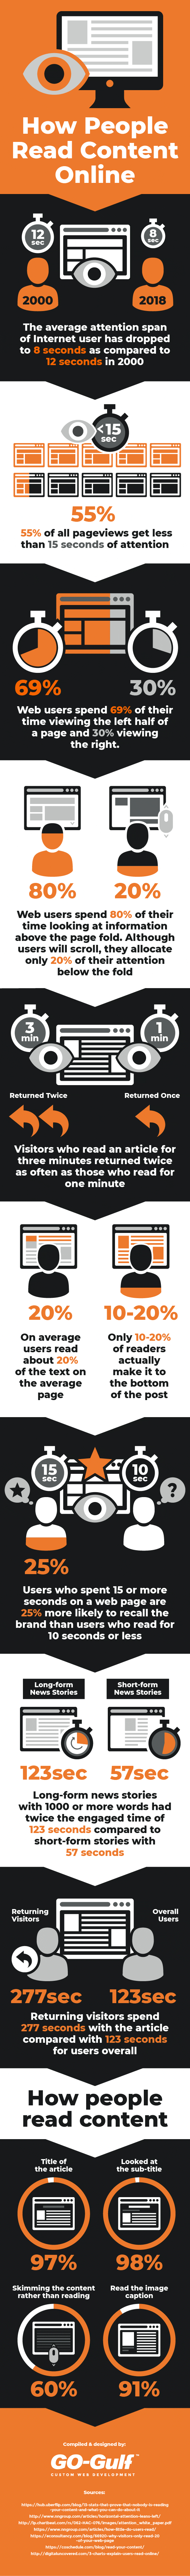 Stats and Trends on How People Read Content Online